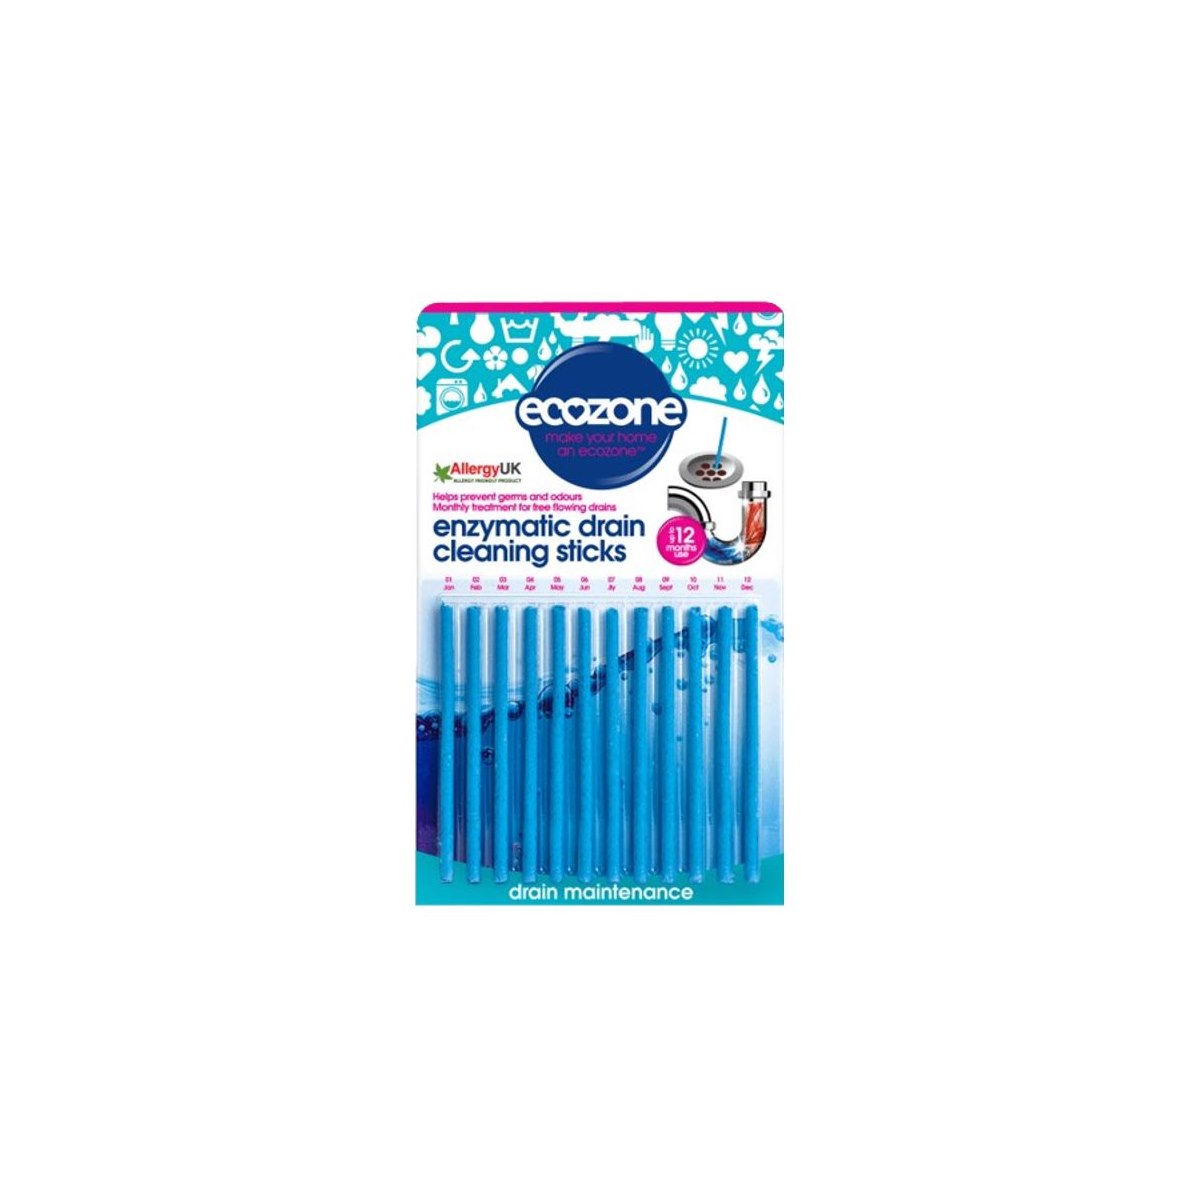 Ecozone Enzymatic Drain Cleaning Sticks Pack of 12